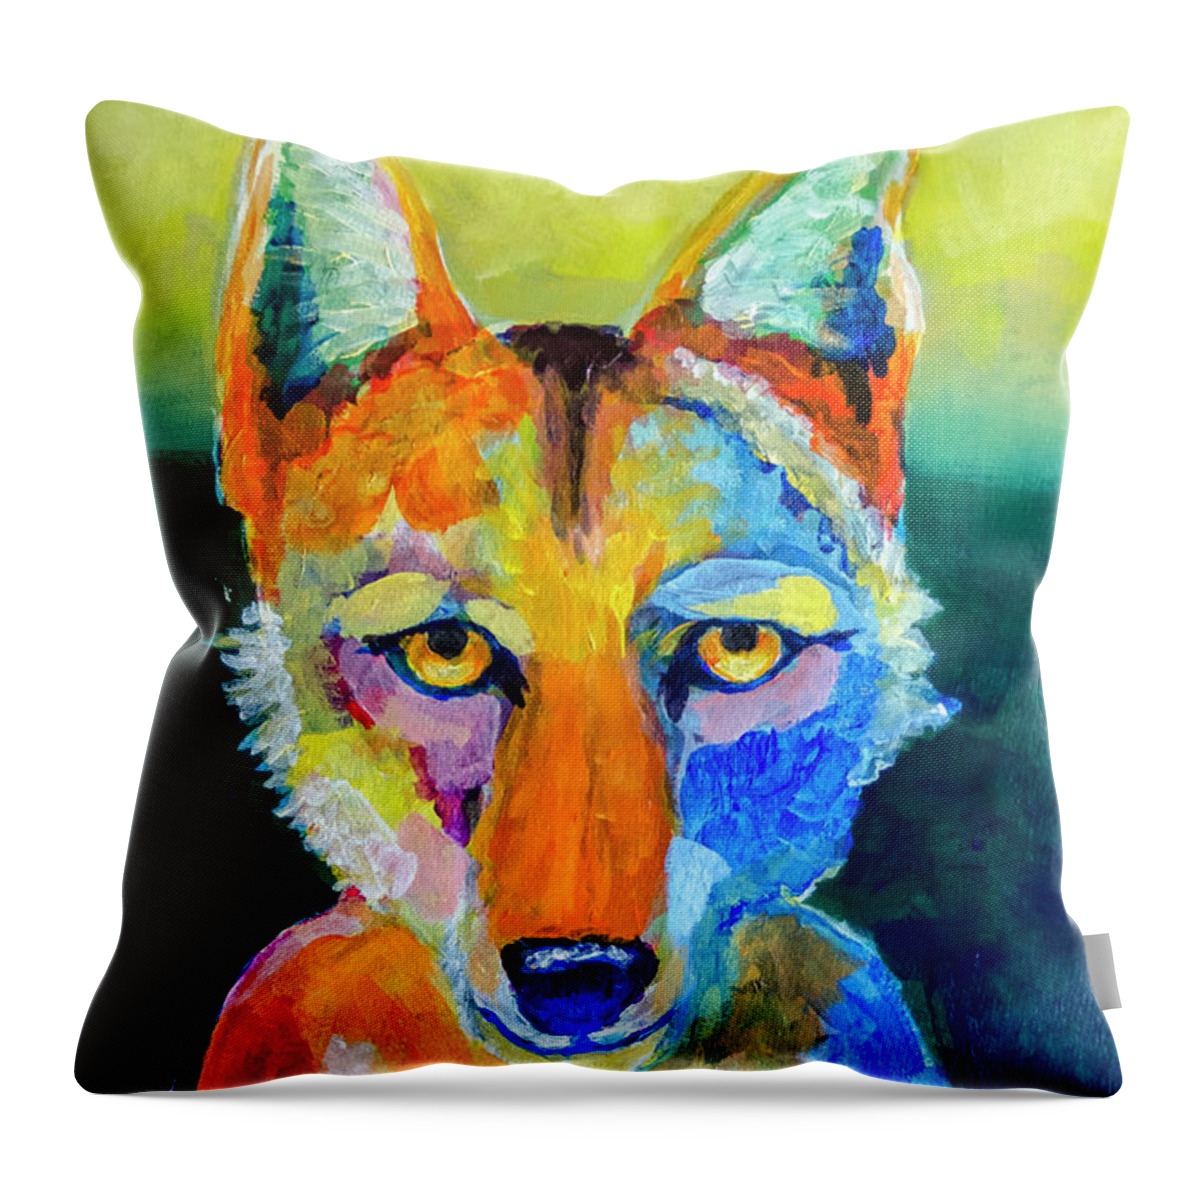 Coyote Throw Pillow featuring the painting Coyote by Rick Mosher